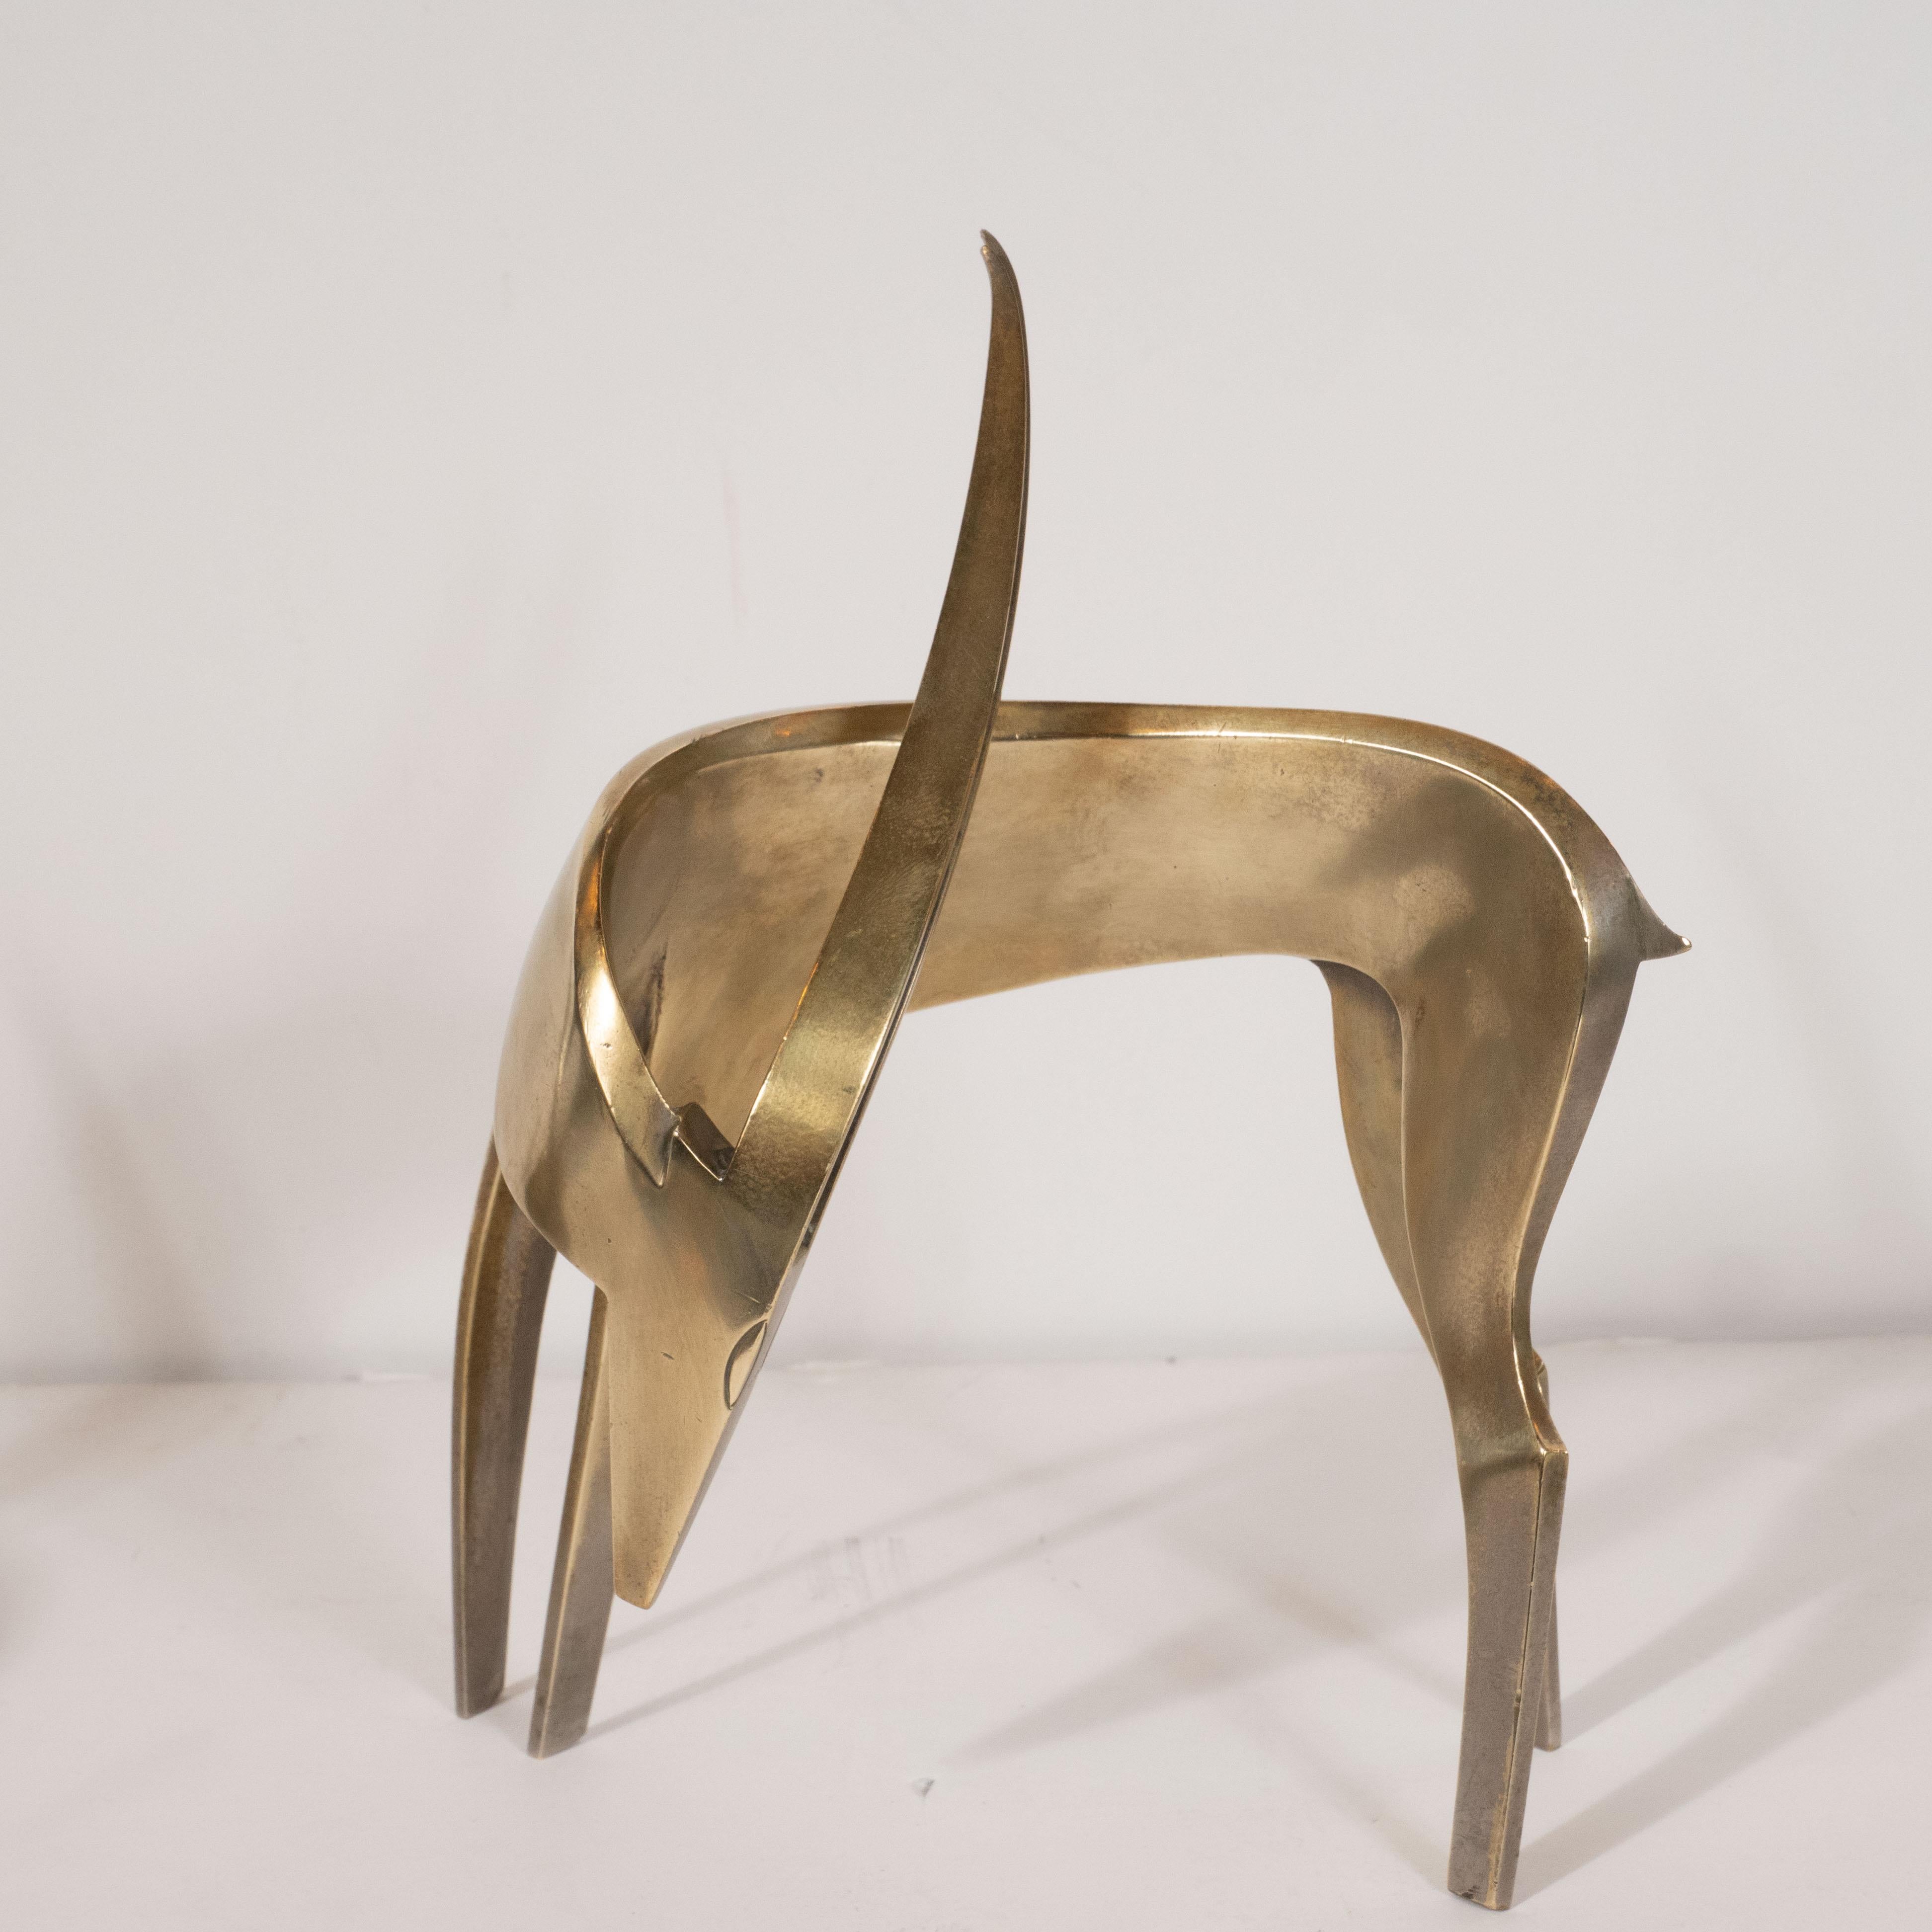 This refined pair of Art Deco stylized waterbuck brass sculptures were realized in Vienna, circa 1940. They feature abstracted interpretations of the waterbuck- an African plains antelope- one lying down, the other upright and both with their heads